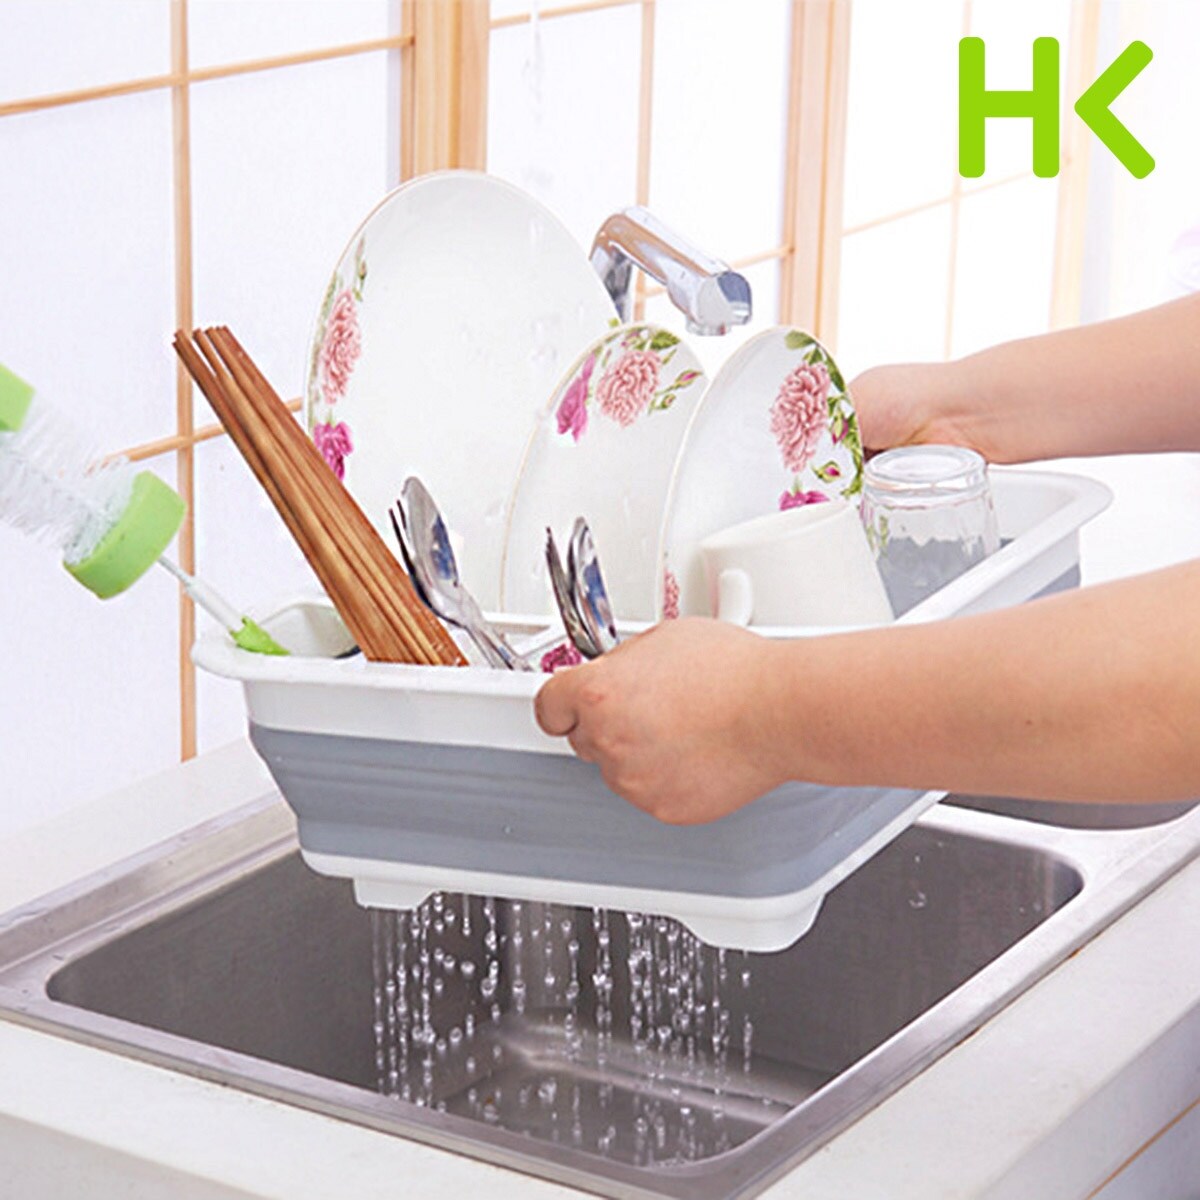 https://ak1.ostkcdn.com/images/products/is/images/direct/ead8b56679d408c3bde4861228dd2d490acb05e3/14.49x12.28x4.92-Dish-Drying-Rack-Dish-Drainer-w-Utensil-Holder-Antimicrobial-Multi-function-Foldable.jpg